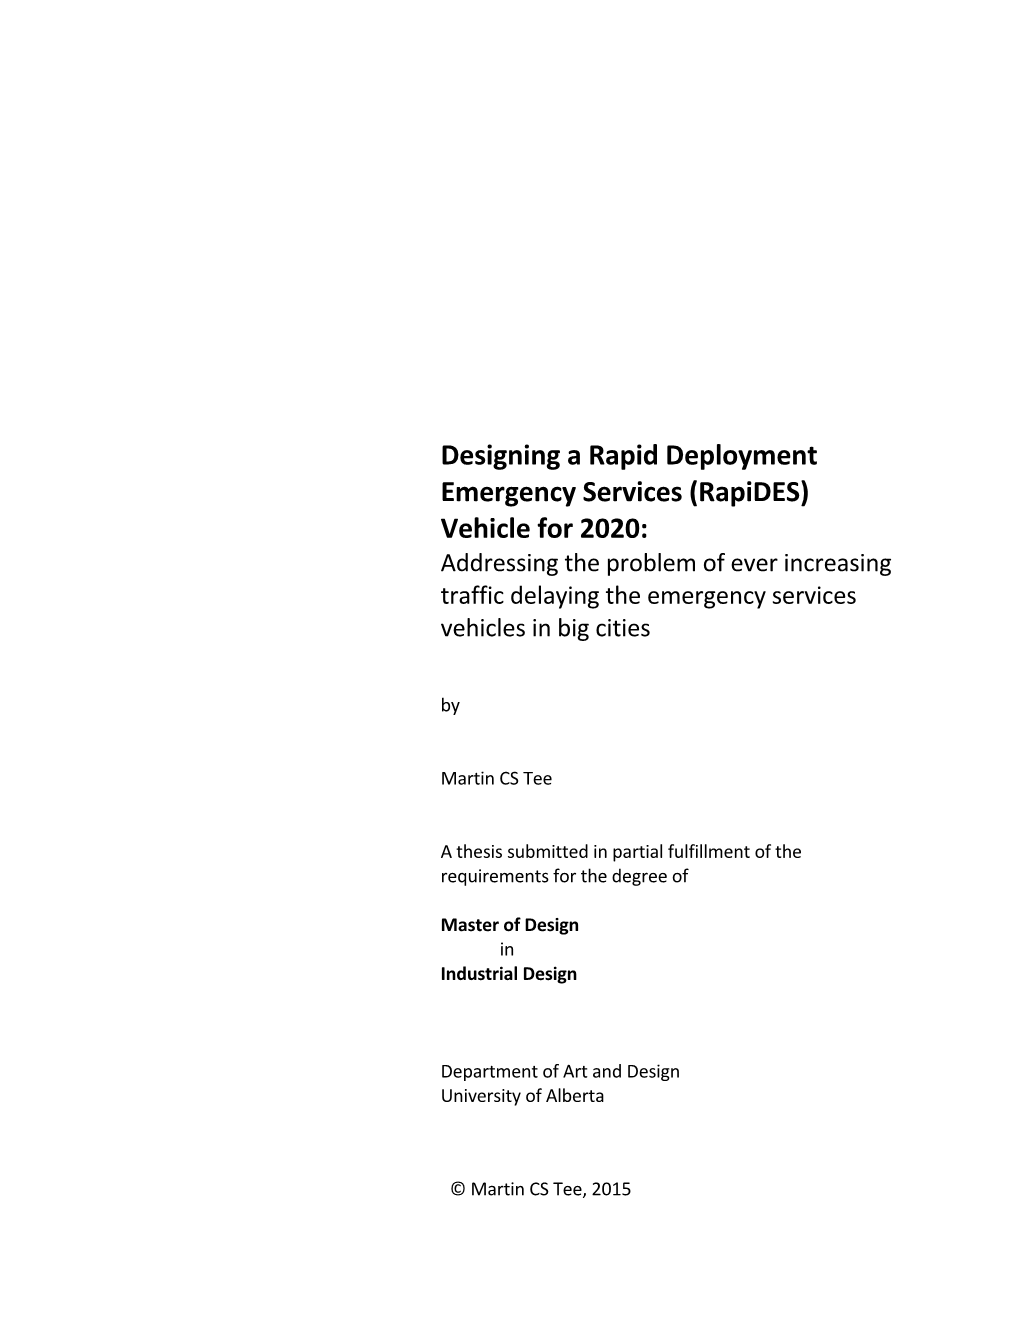 Designing a Rapid Deployment Emergency Services